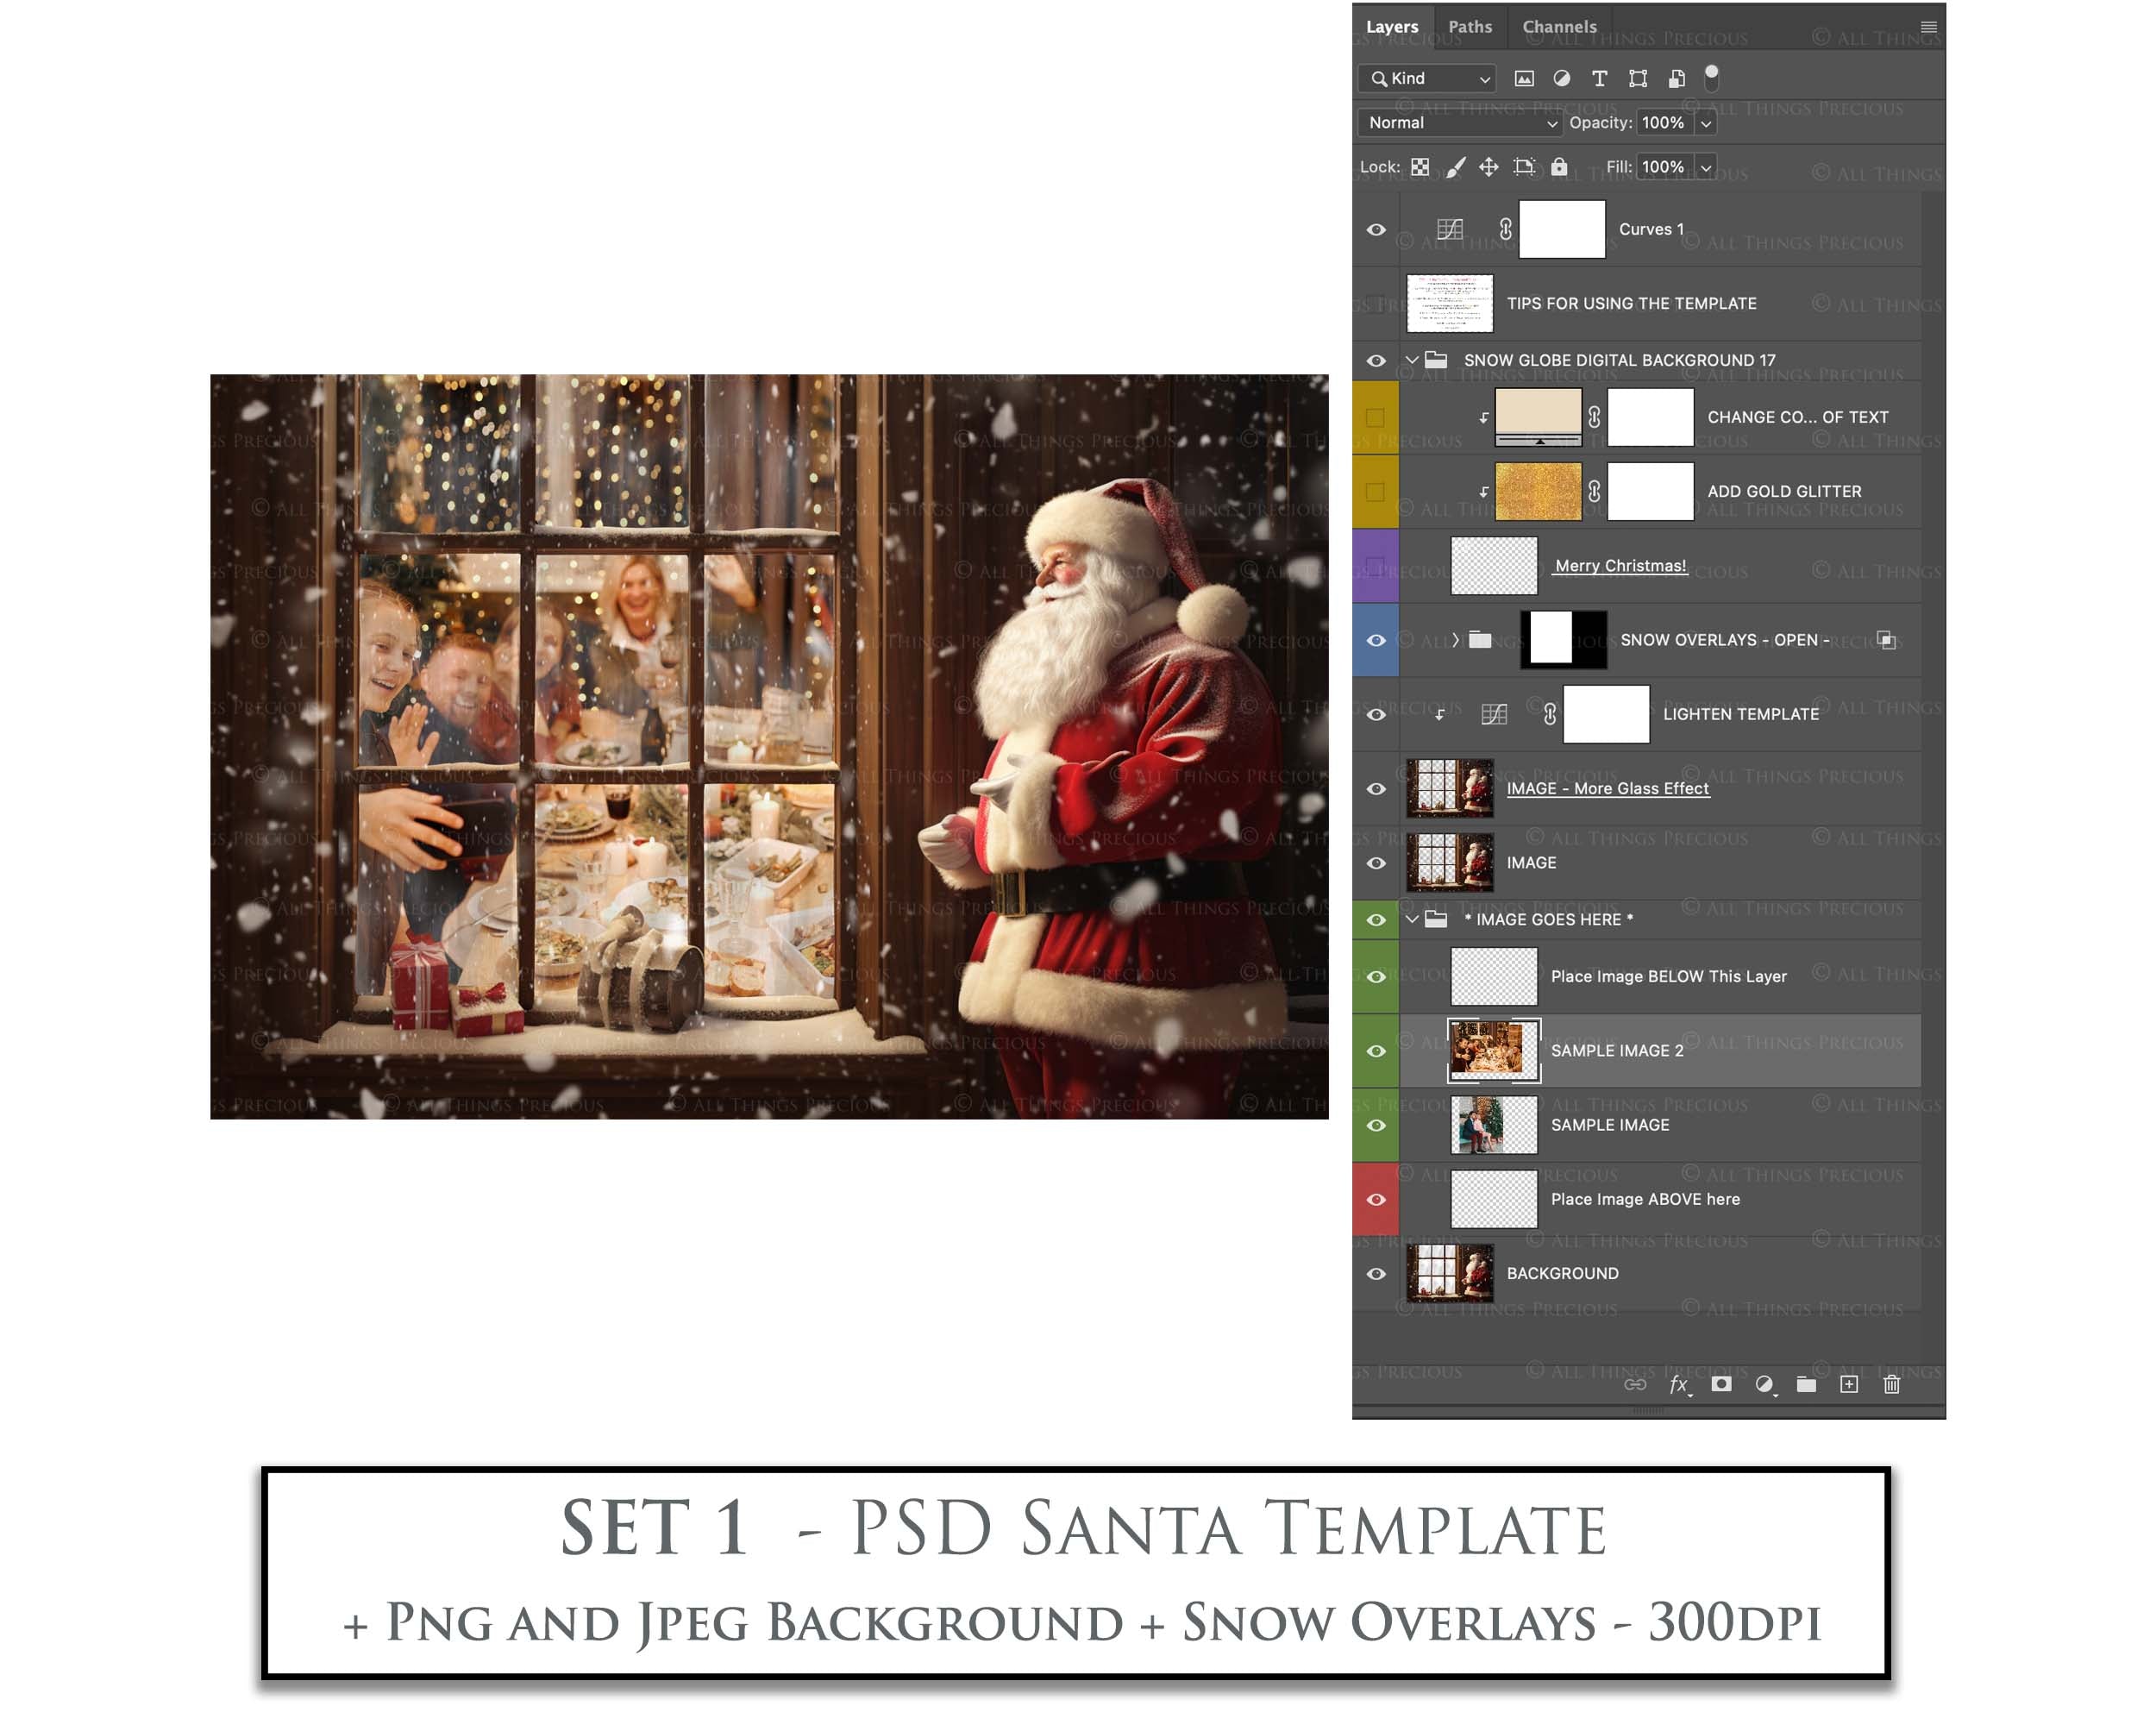 Digital Santa Window Background, with snow flurries and a PSD Template included in the set. The Window has a glass effect and is transparent, perfect for you to add your own images and retain the effect.